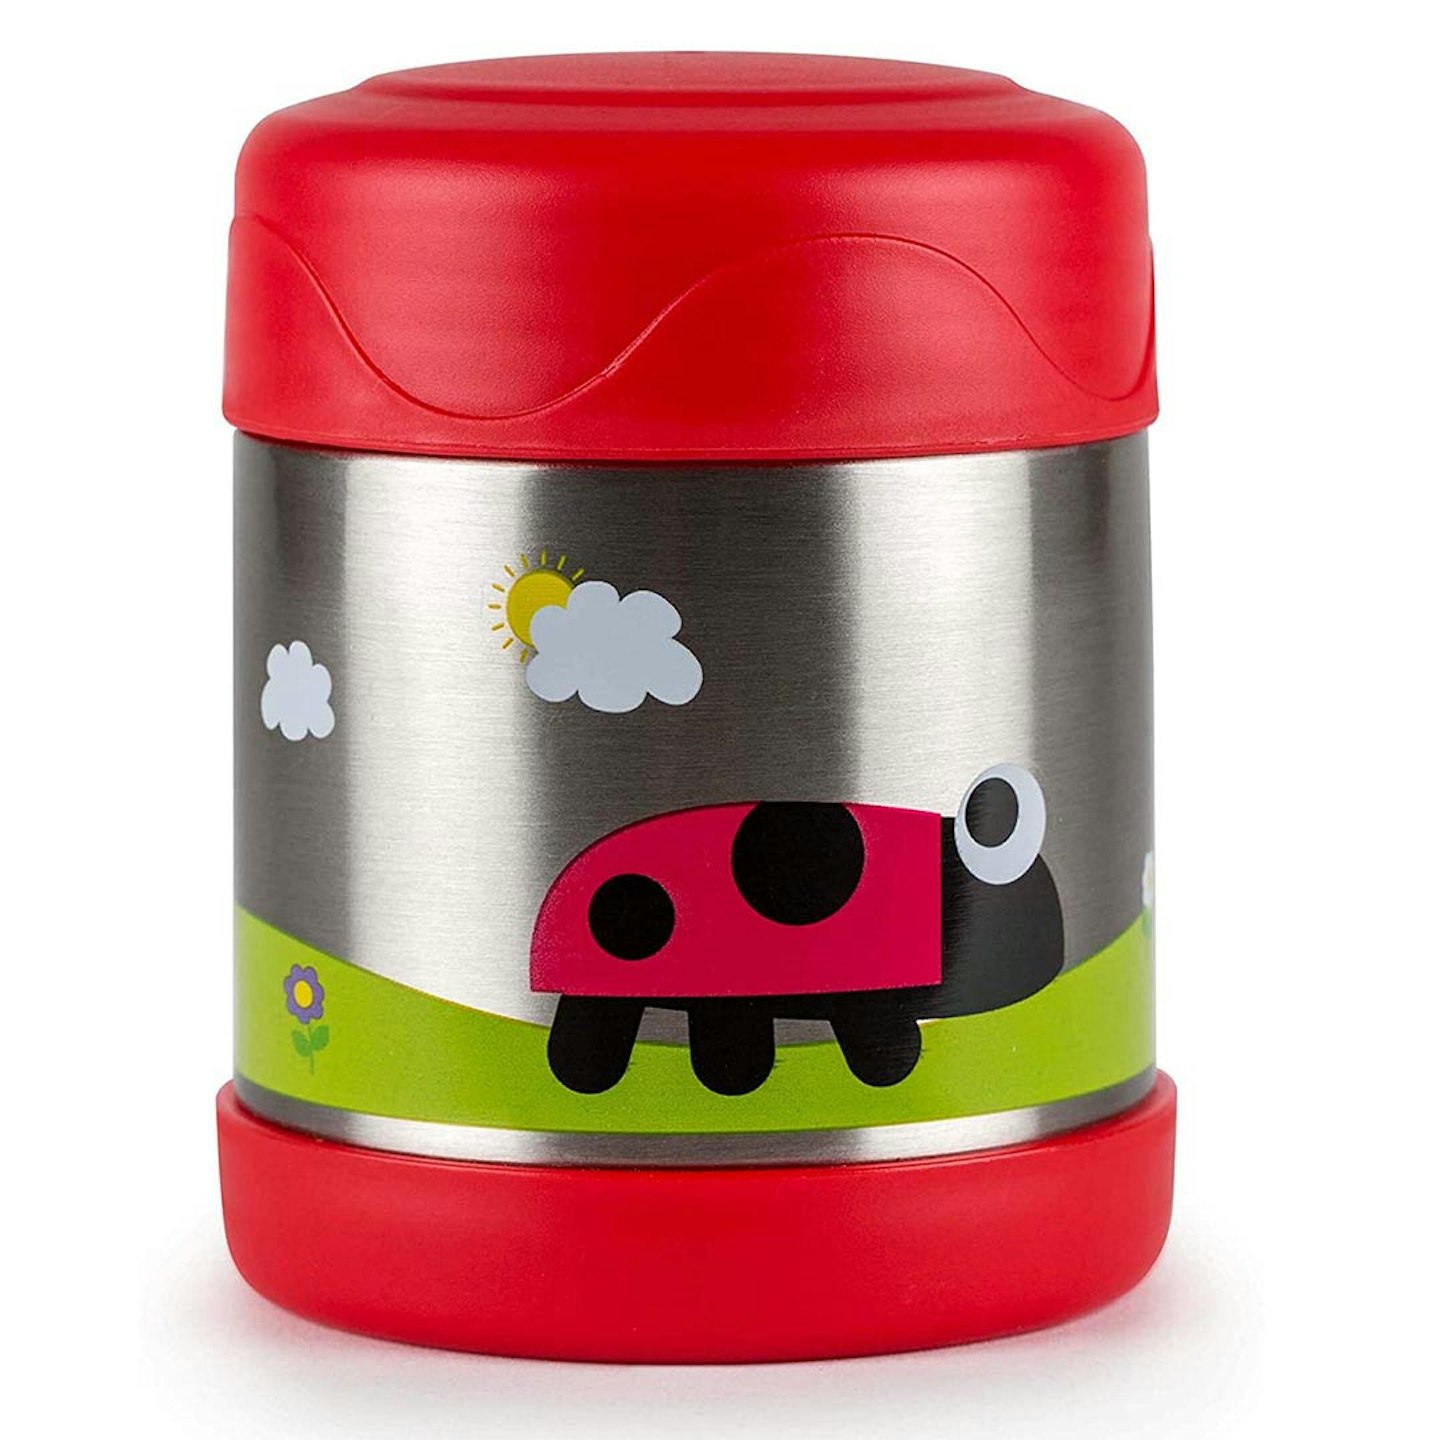 How Long Can Warmed Whole Milk Stay Good In A Thermos Flask For Toddler?